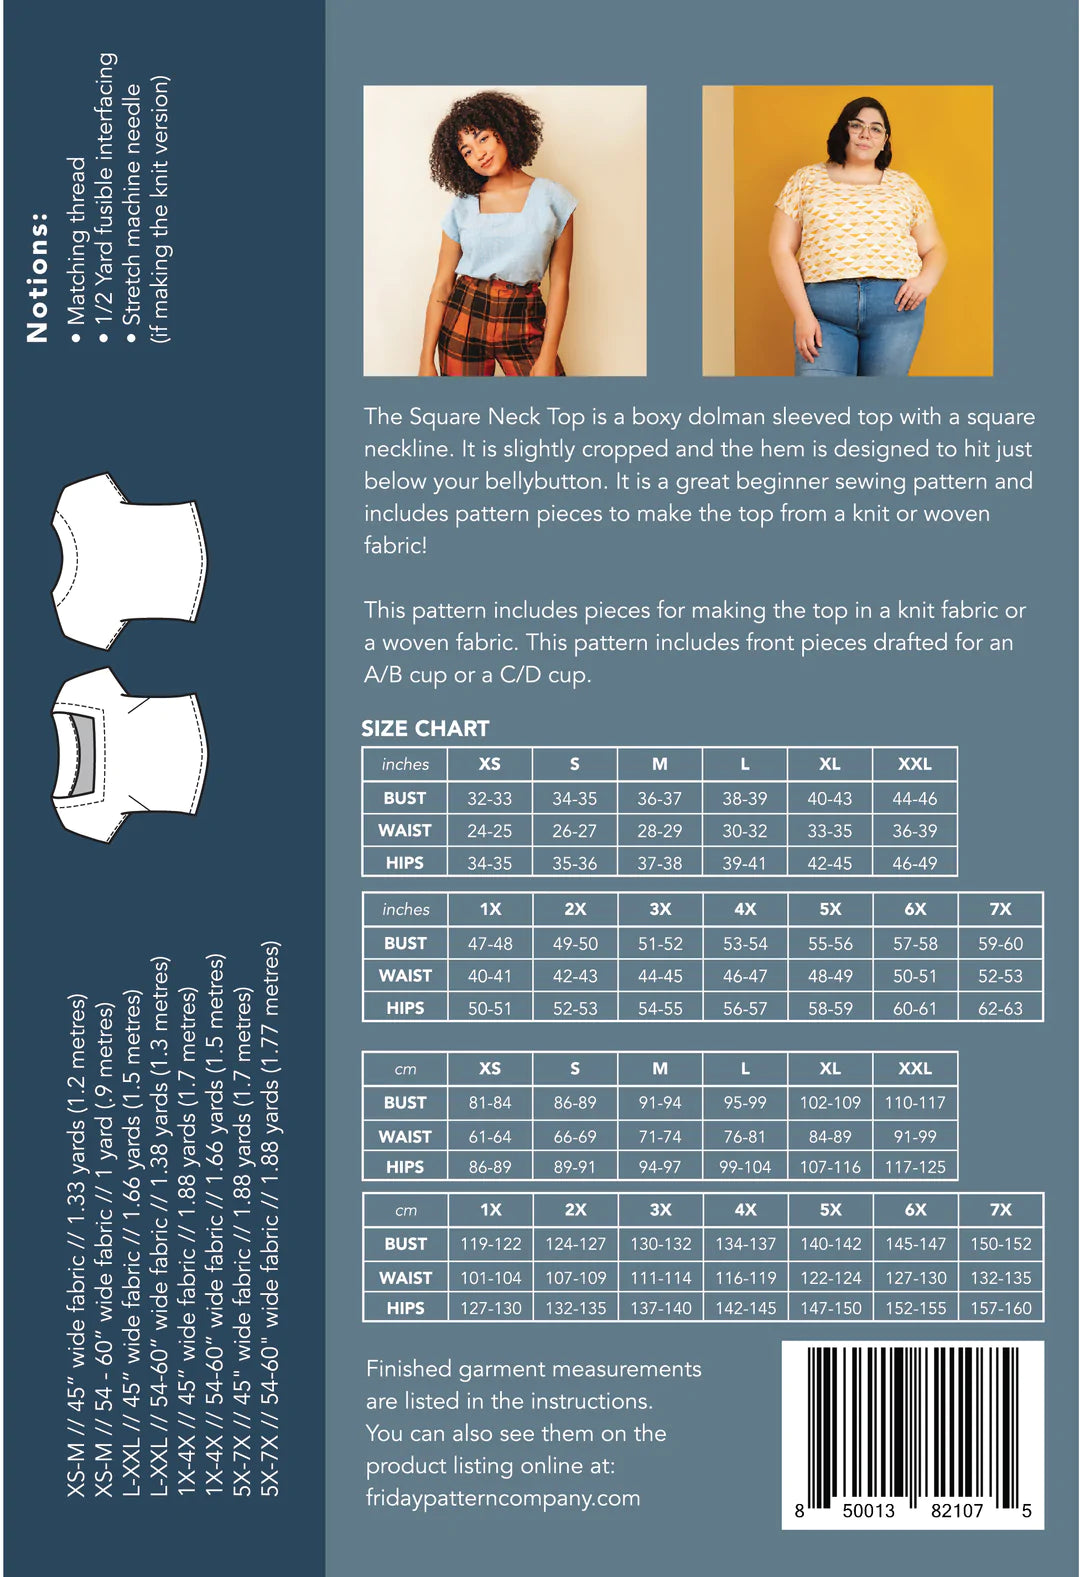 size guide and fabric requirements for The Square neck top sewing pattern from Friday Pattern Company.